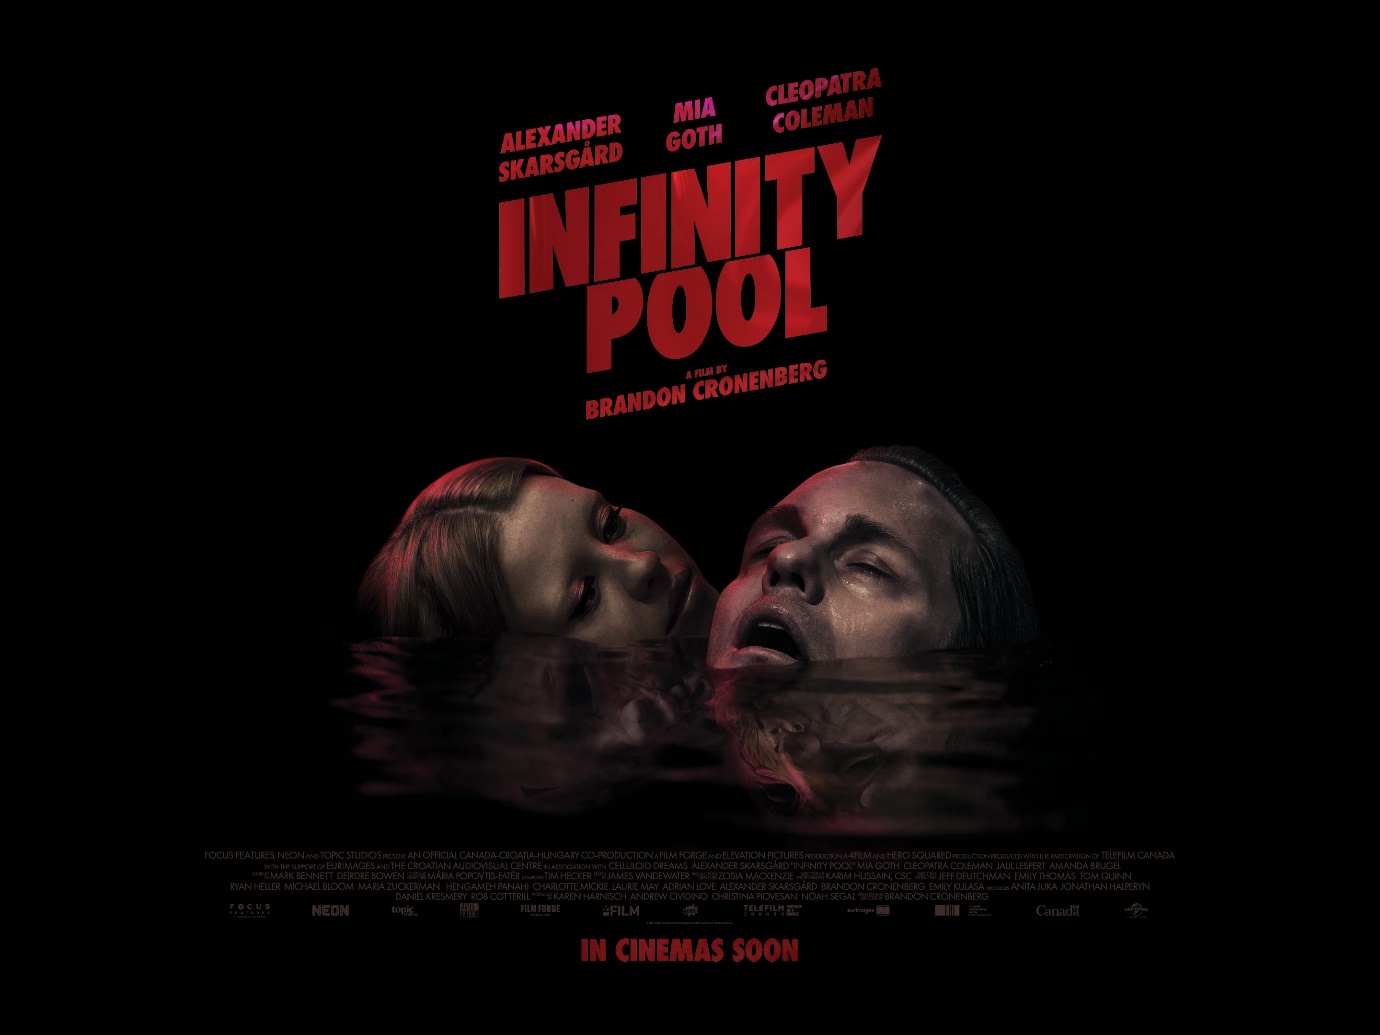 Infinity Pool review: Well worth the deep dive